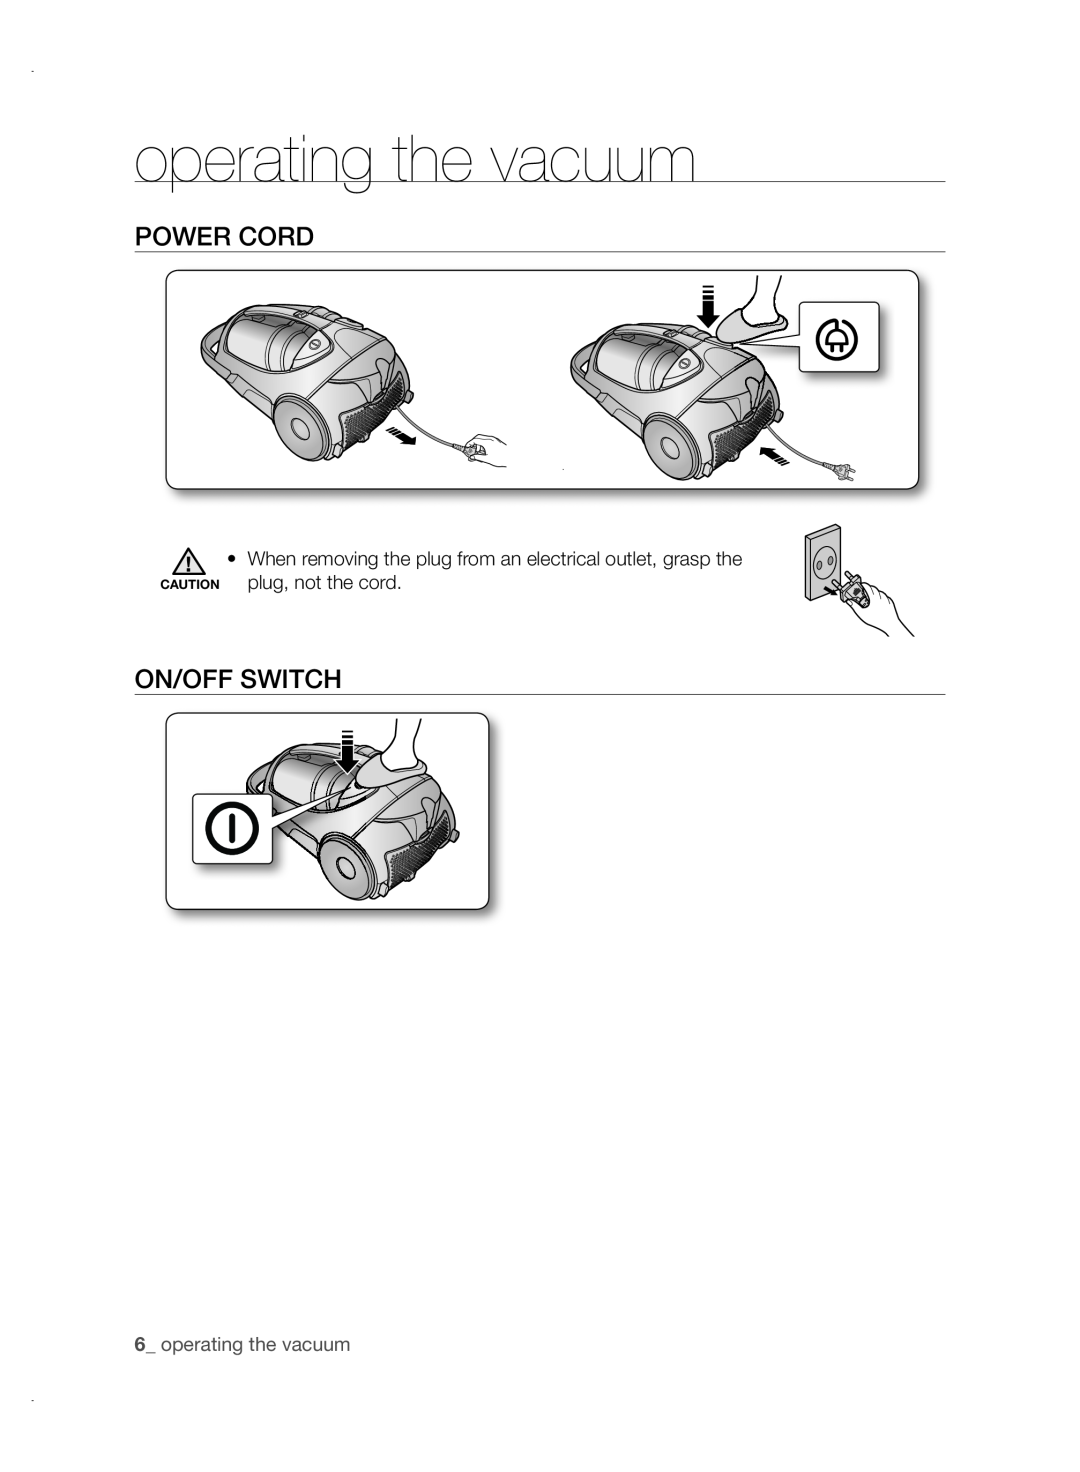 Samsung VCC88P0H1B user manual operating the vacuum, Power Cord, On/Off Switch 